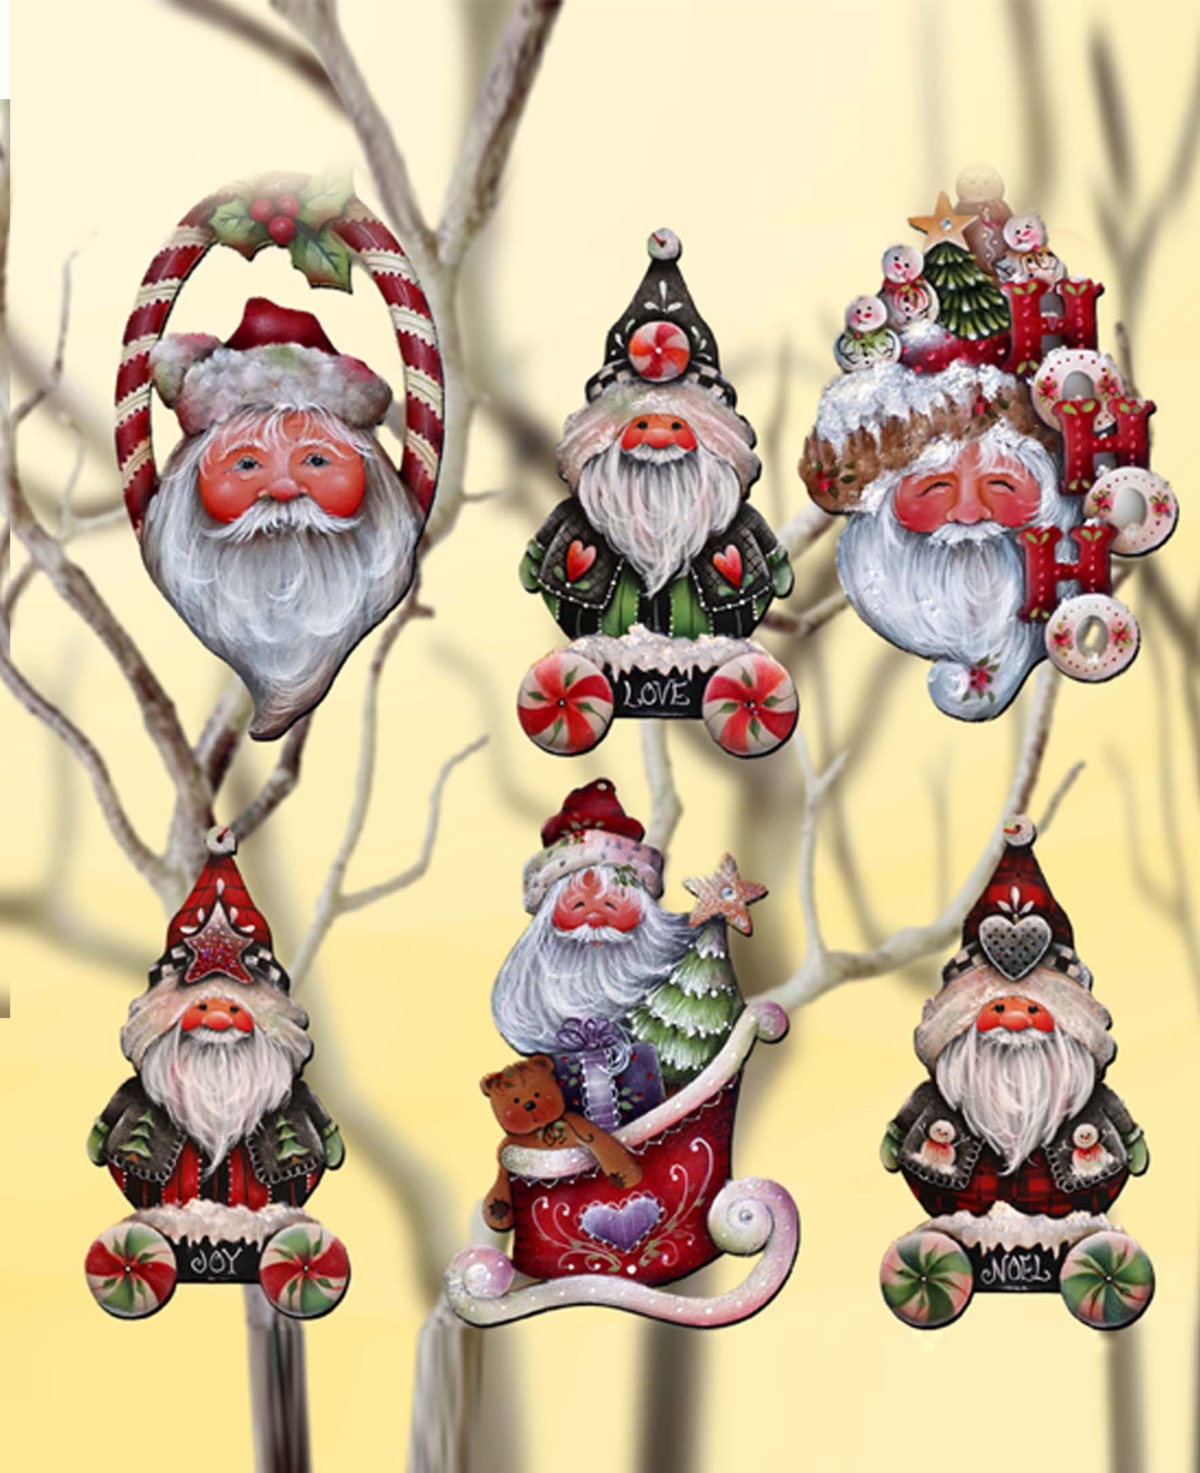 Designocracy Magical Baby Santa Christmas Wood Clip-on Ornaments Set Of 6 J. Mills-price In Multi Color